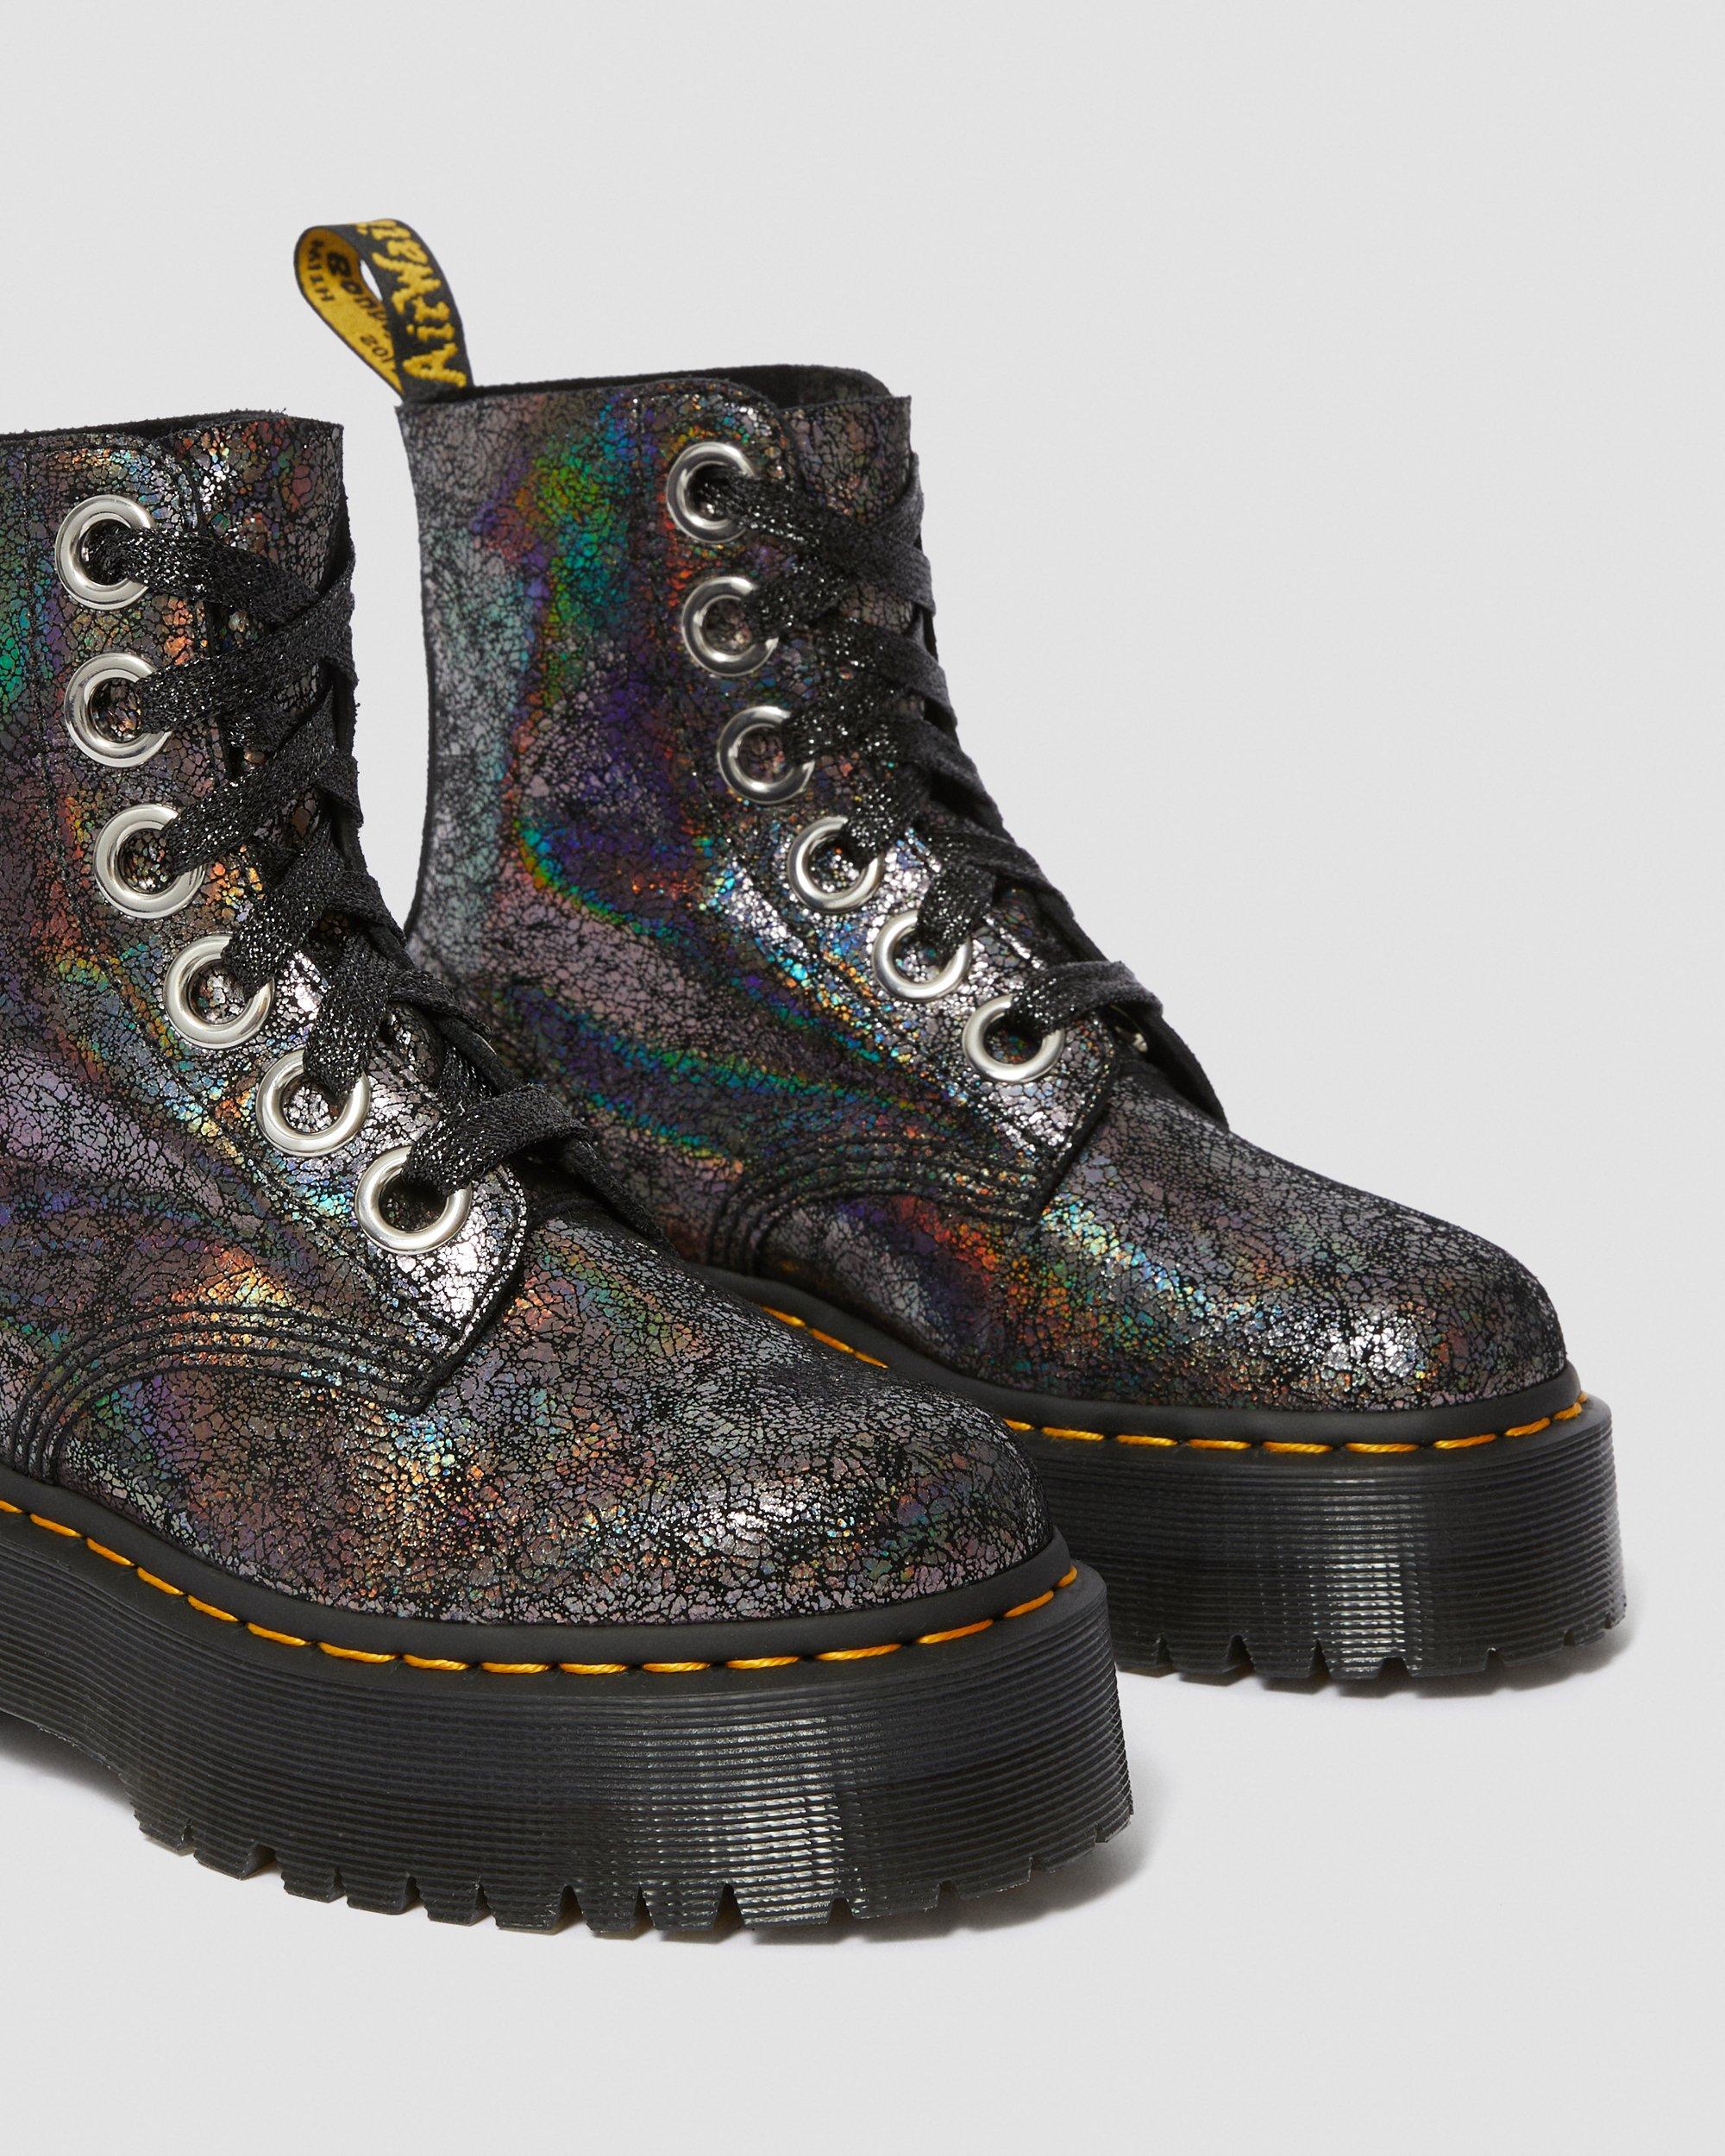 DR MARTENS Molly Metallic Leather Platform Boots